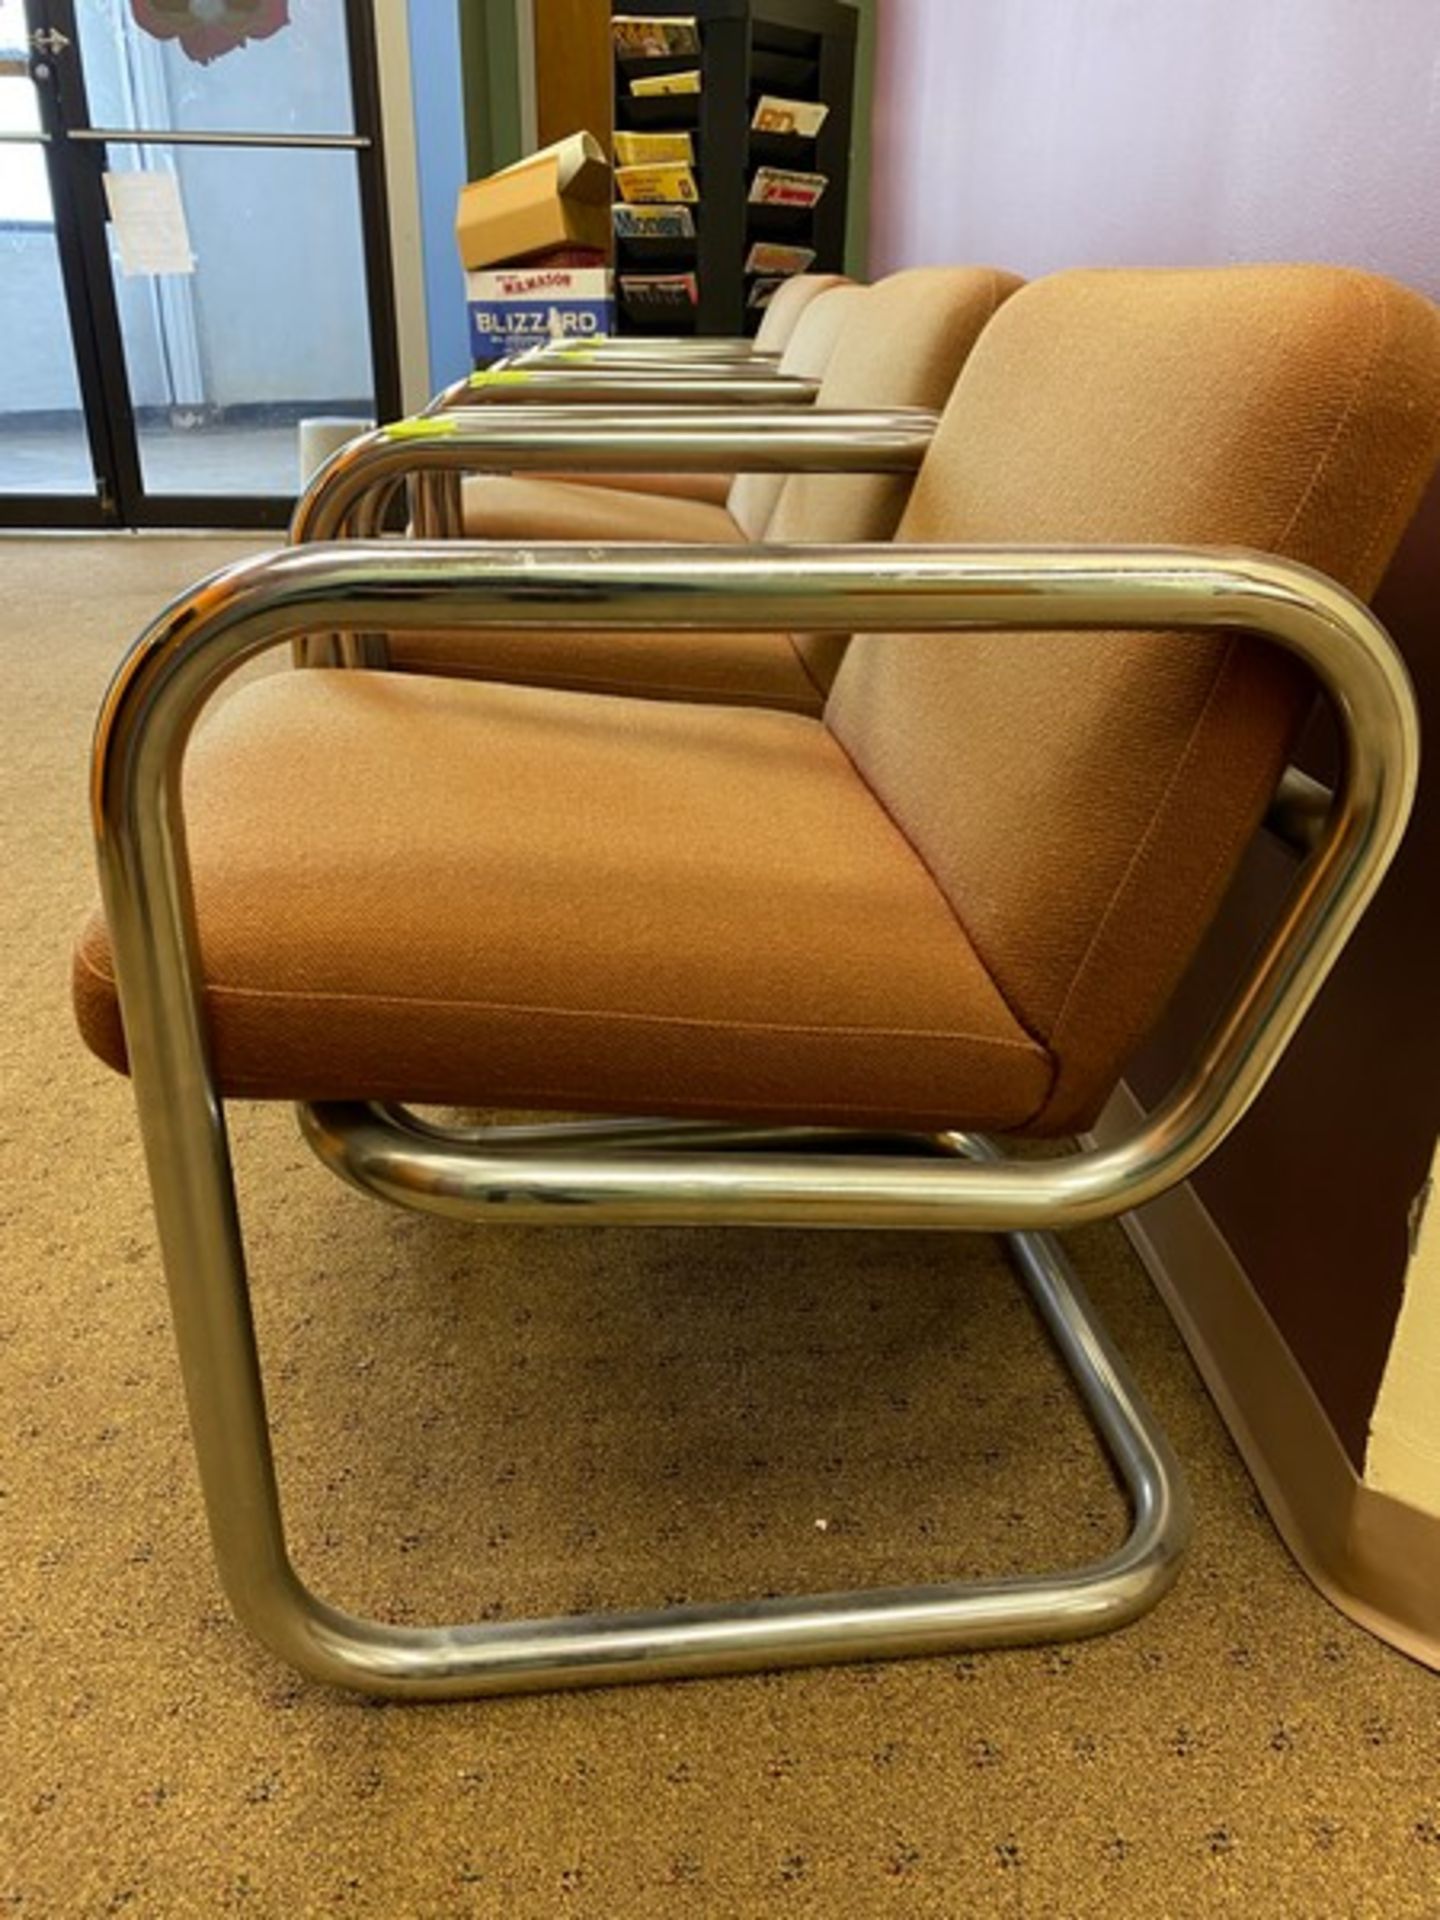 Six (6) metal-framed upholstered chairs. Tan colored durable fabric, silver-colored metal frame. - Image 3 of 7